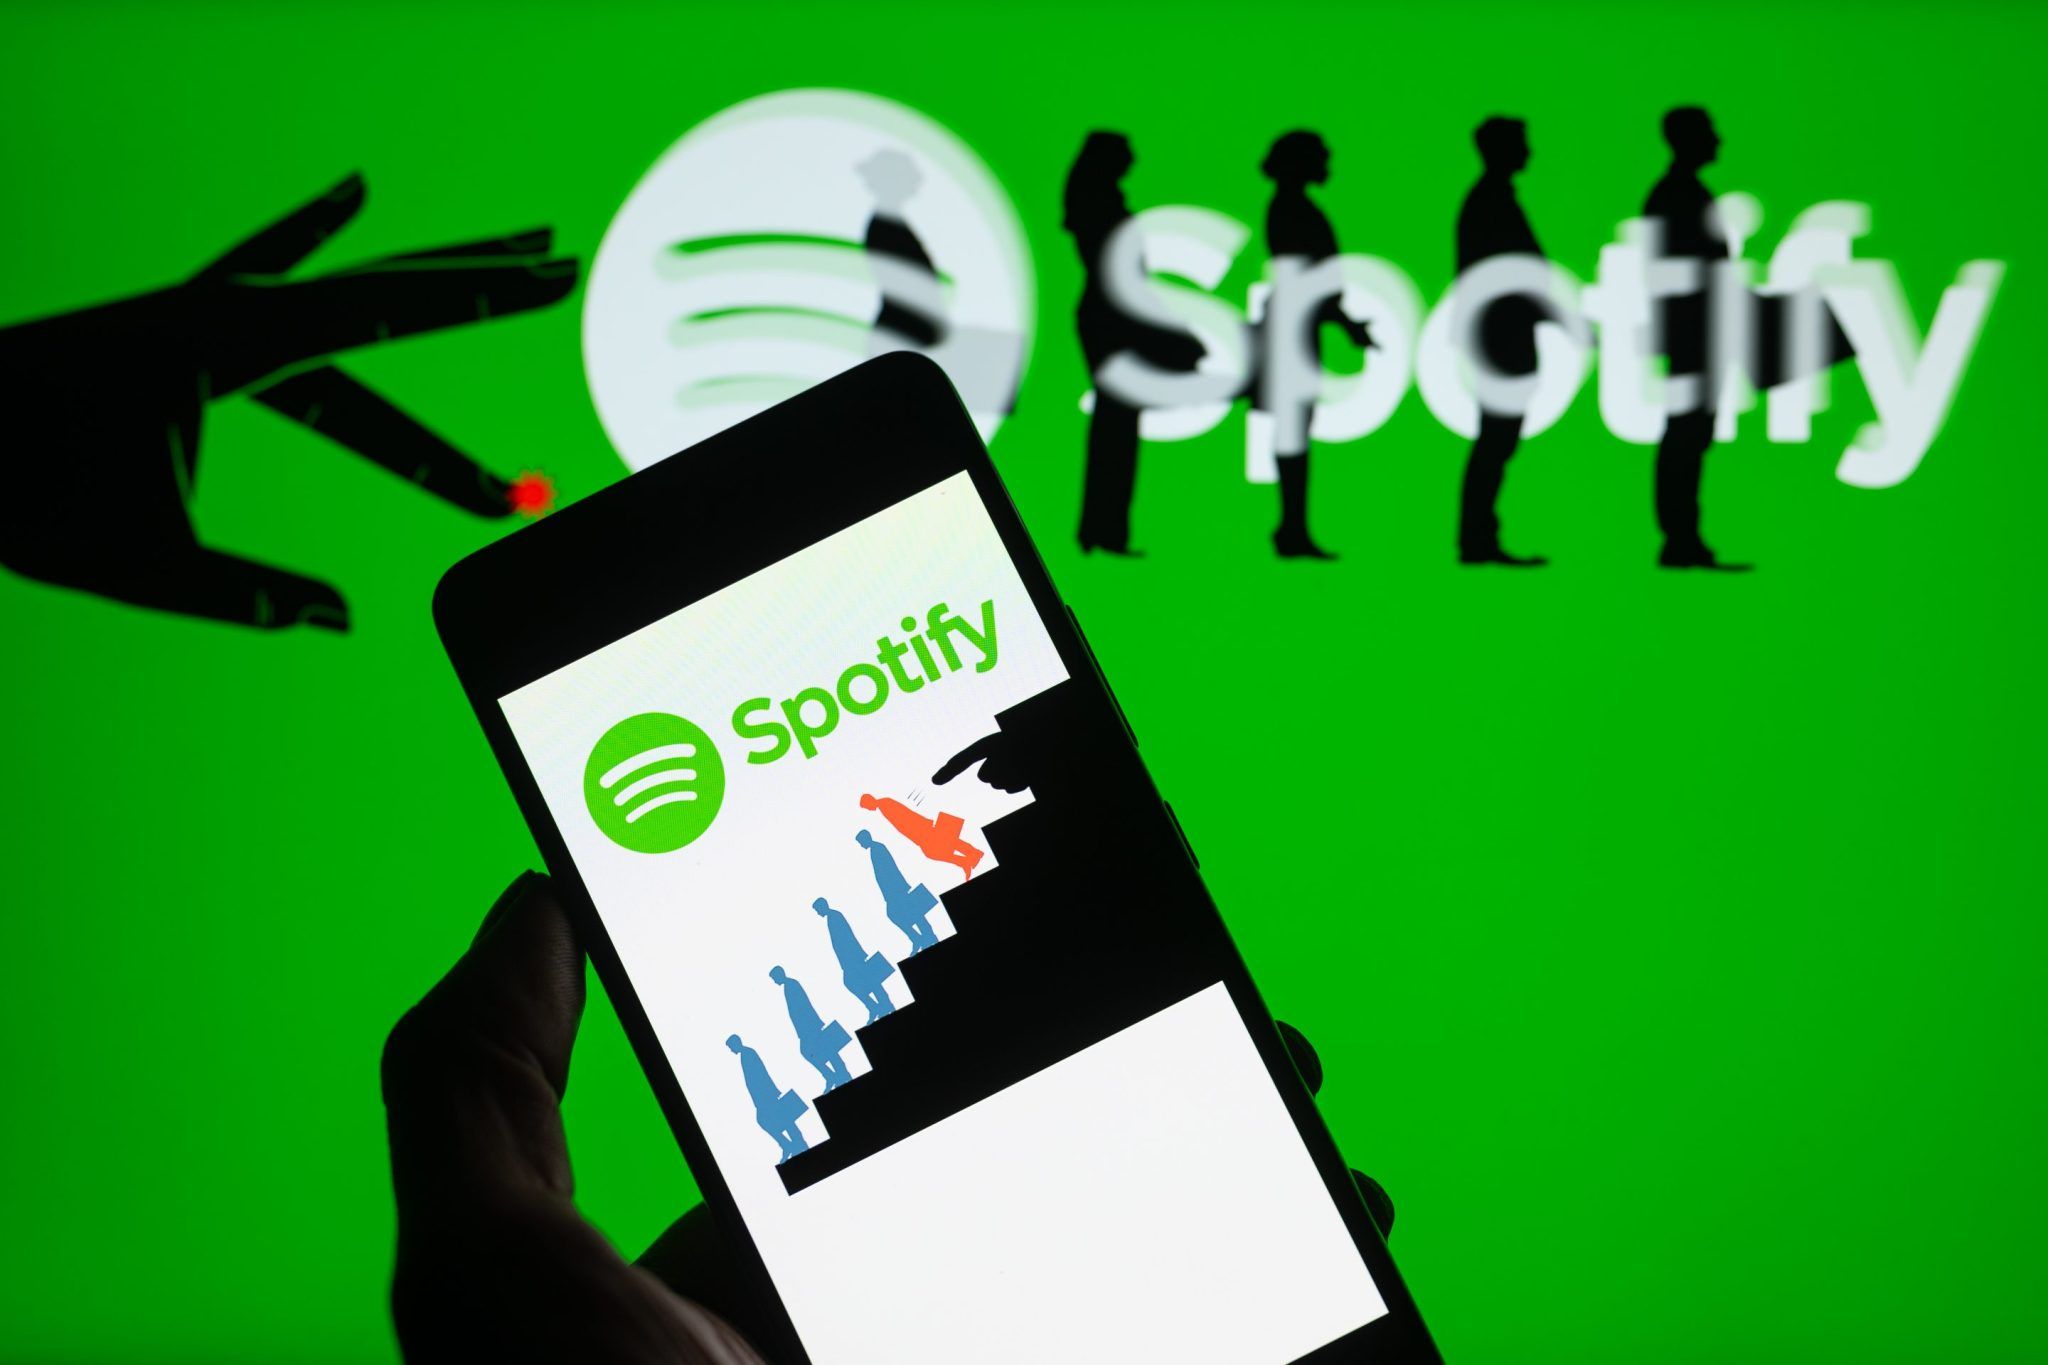 Spotify announces CFO to leave, days after he cashed in $9.3m in shares, Spotify